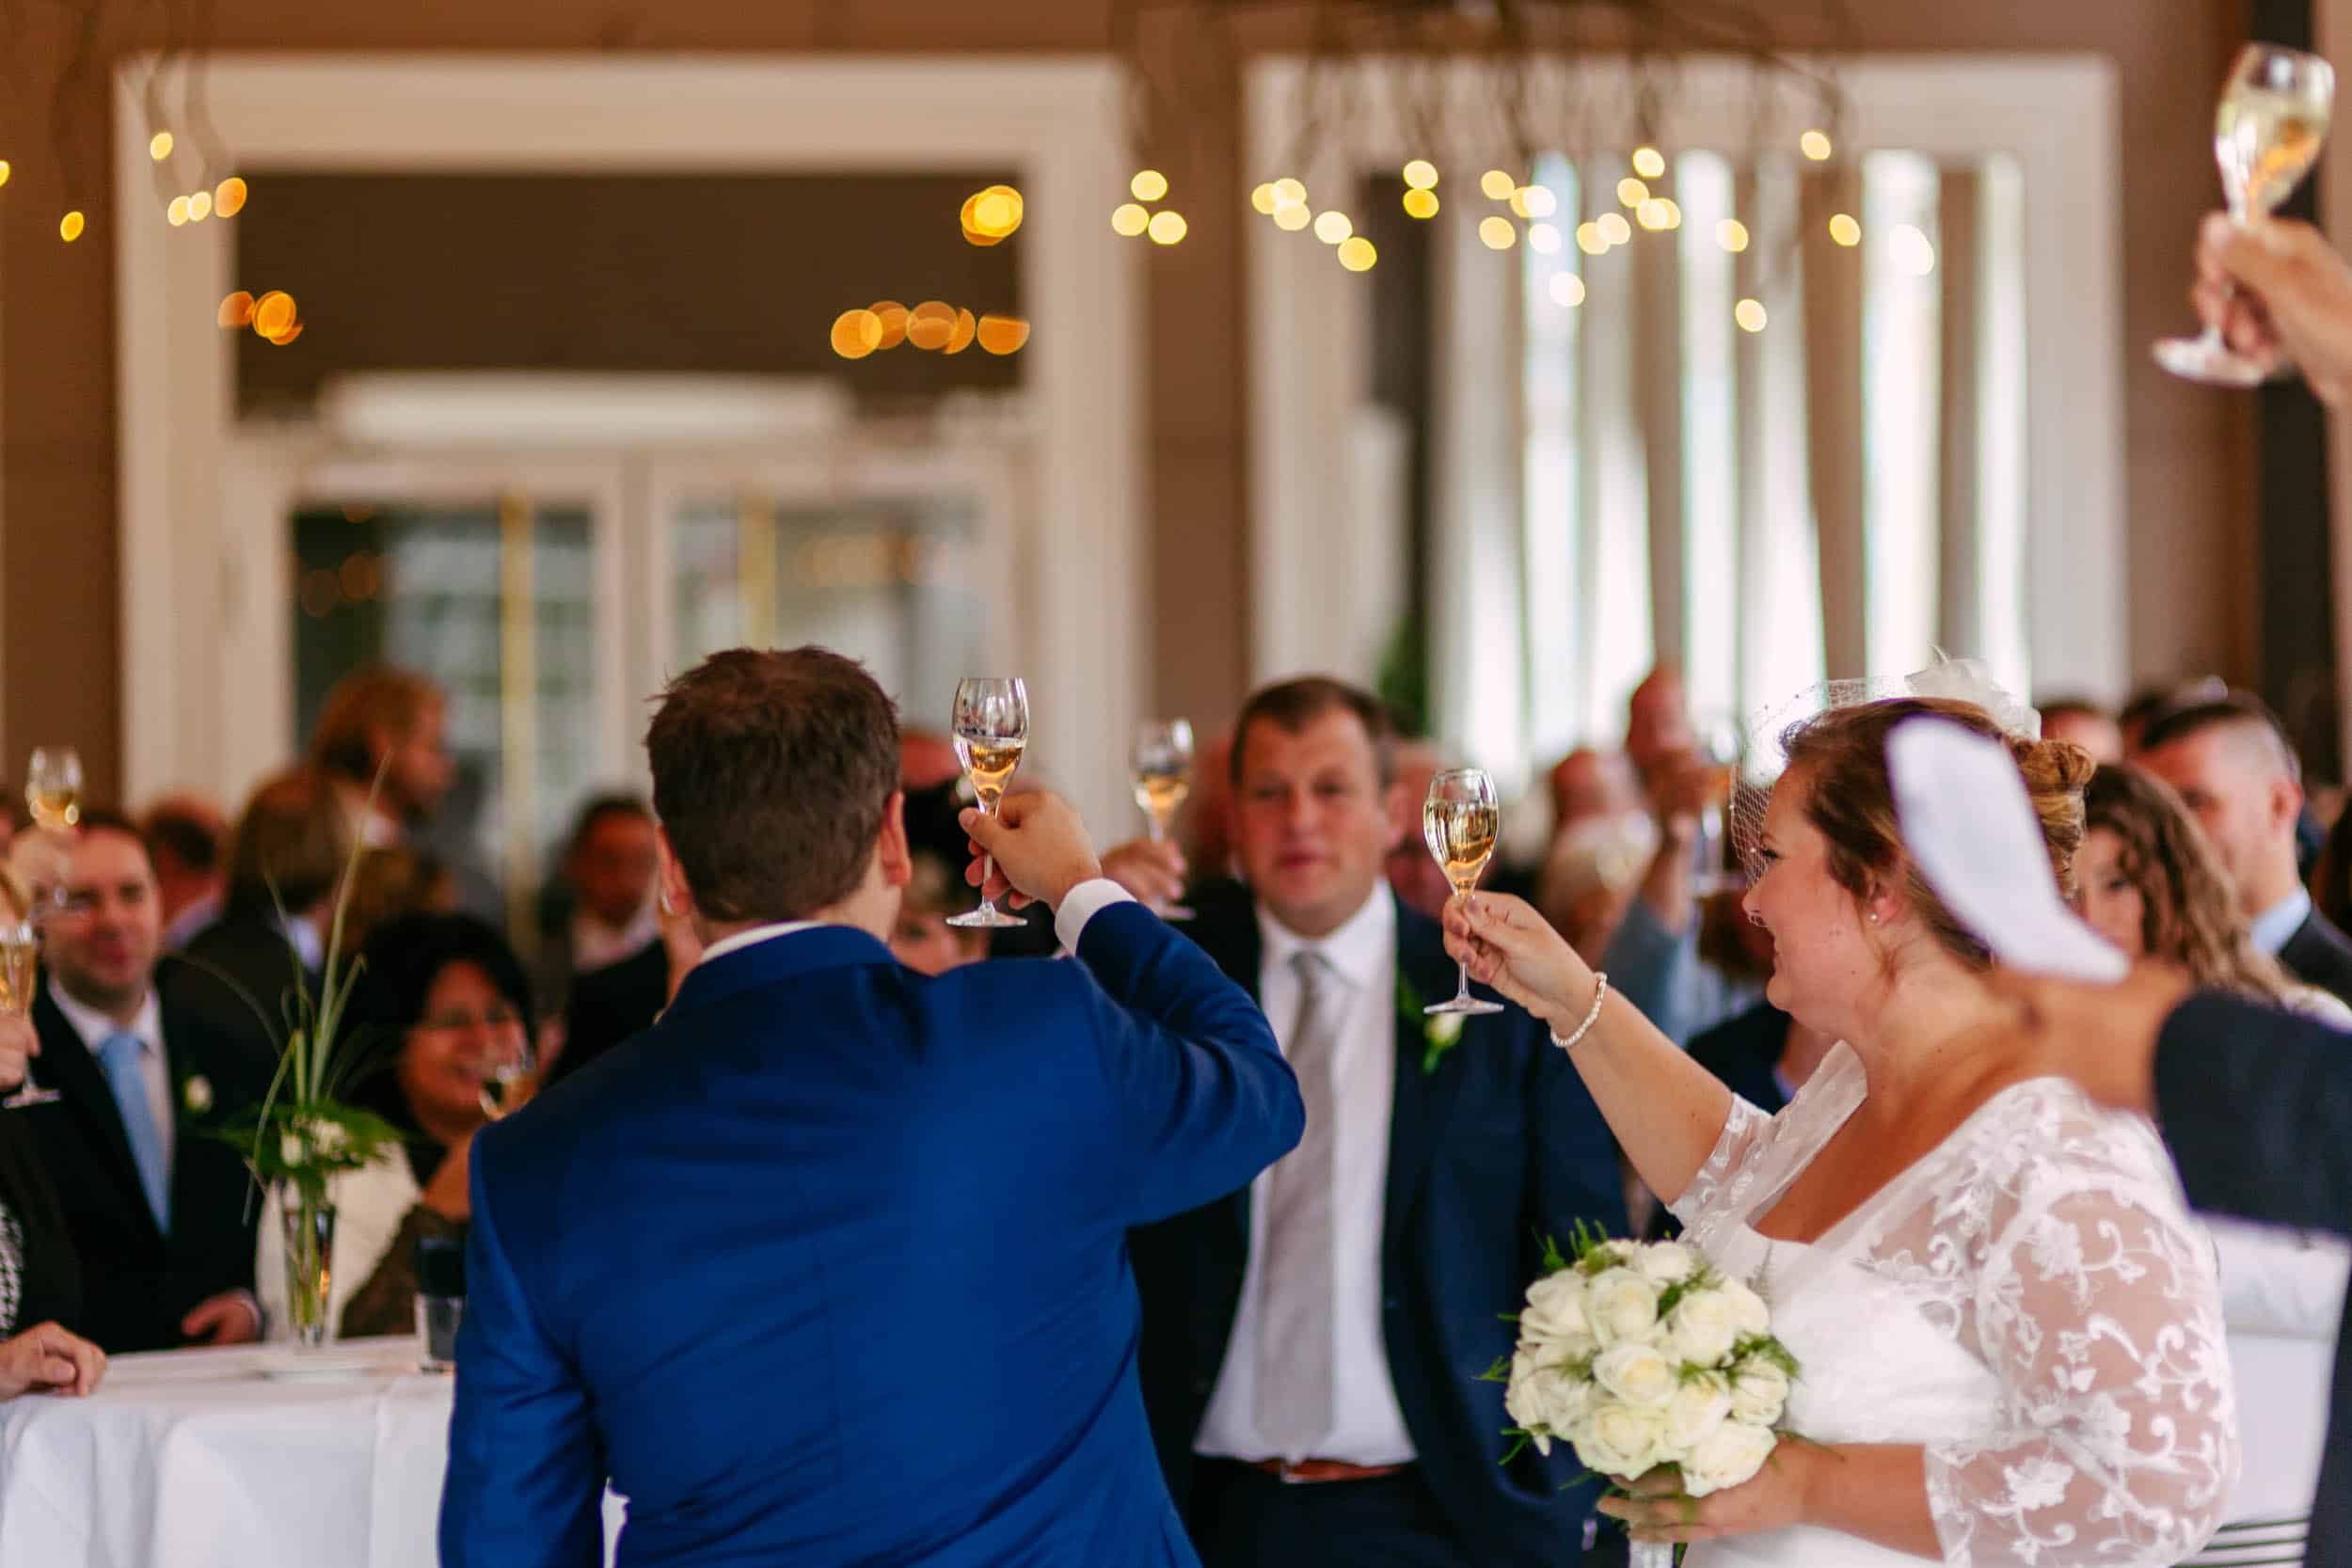 A bride and groom toasting during a wedding reception.